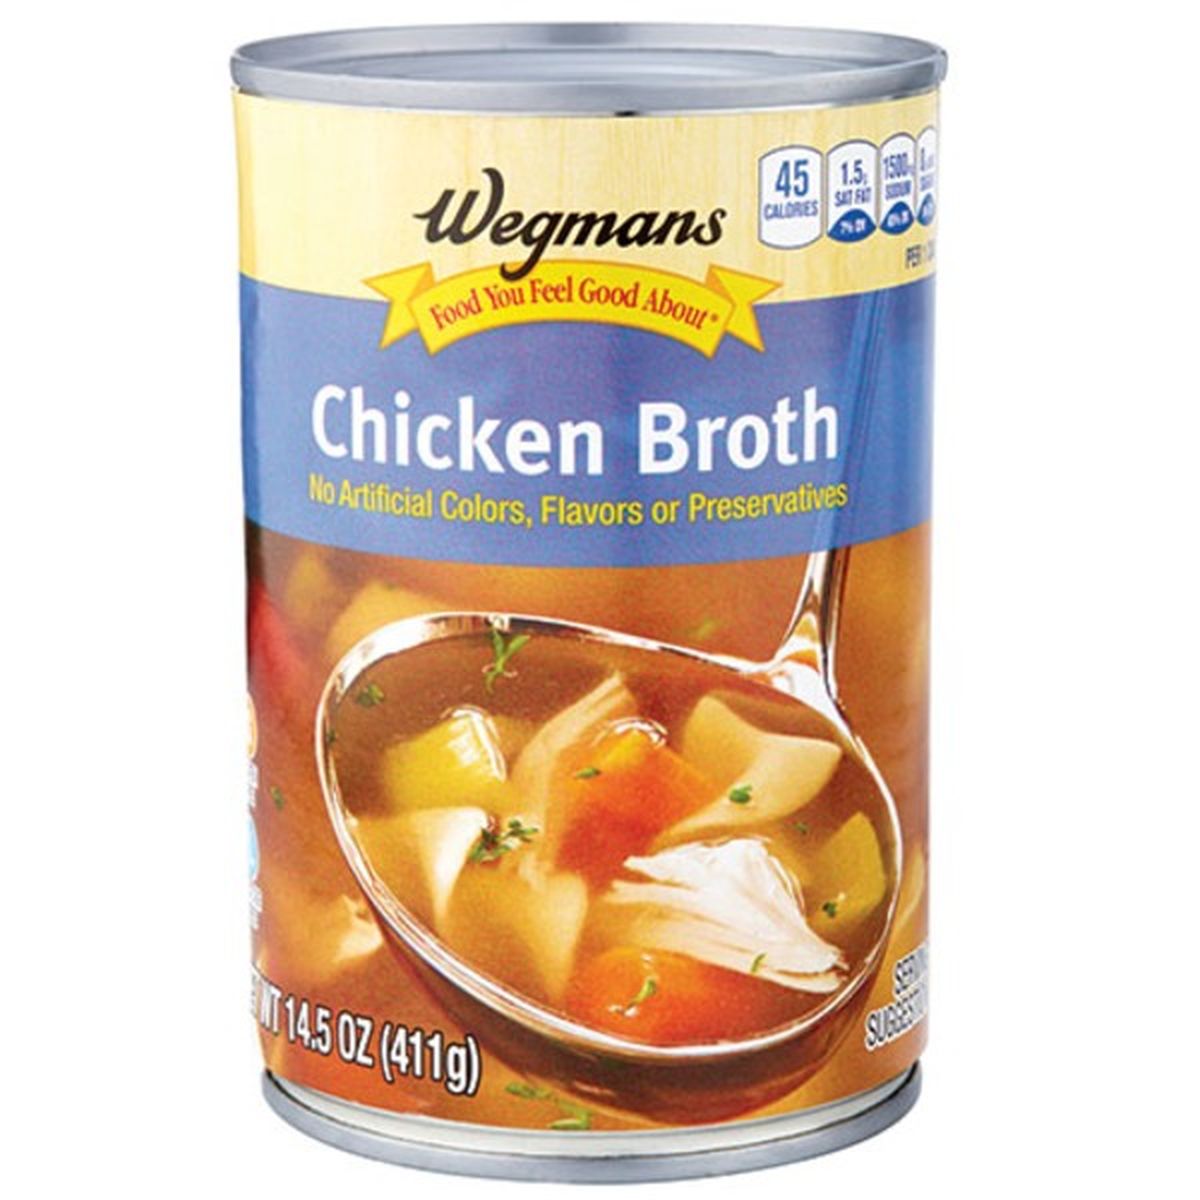 Calories in Wegmans Canned Chicken Broth